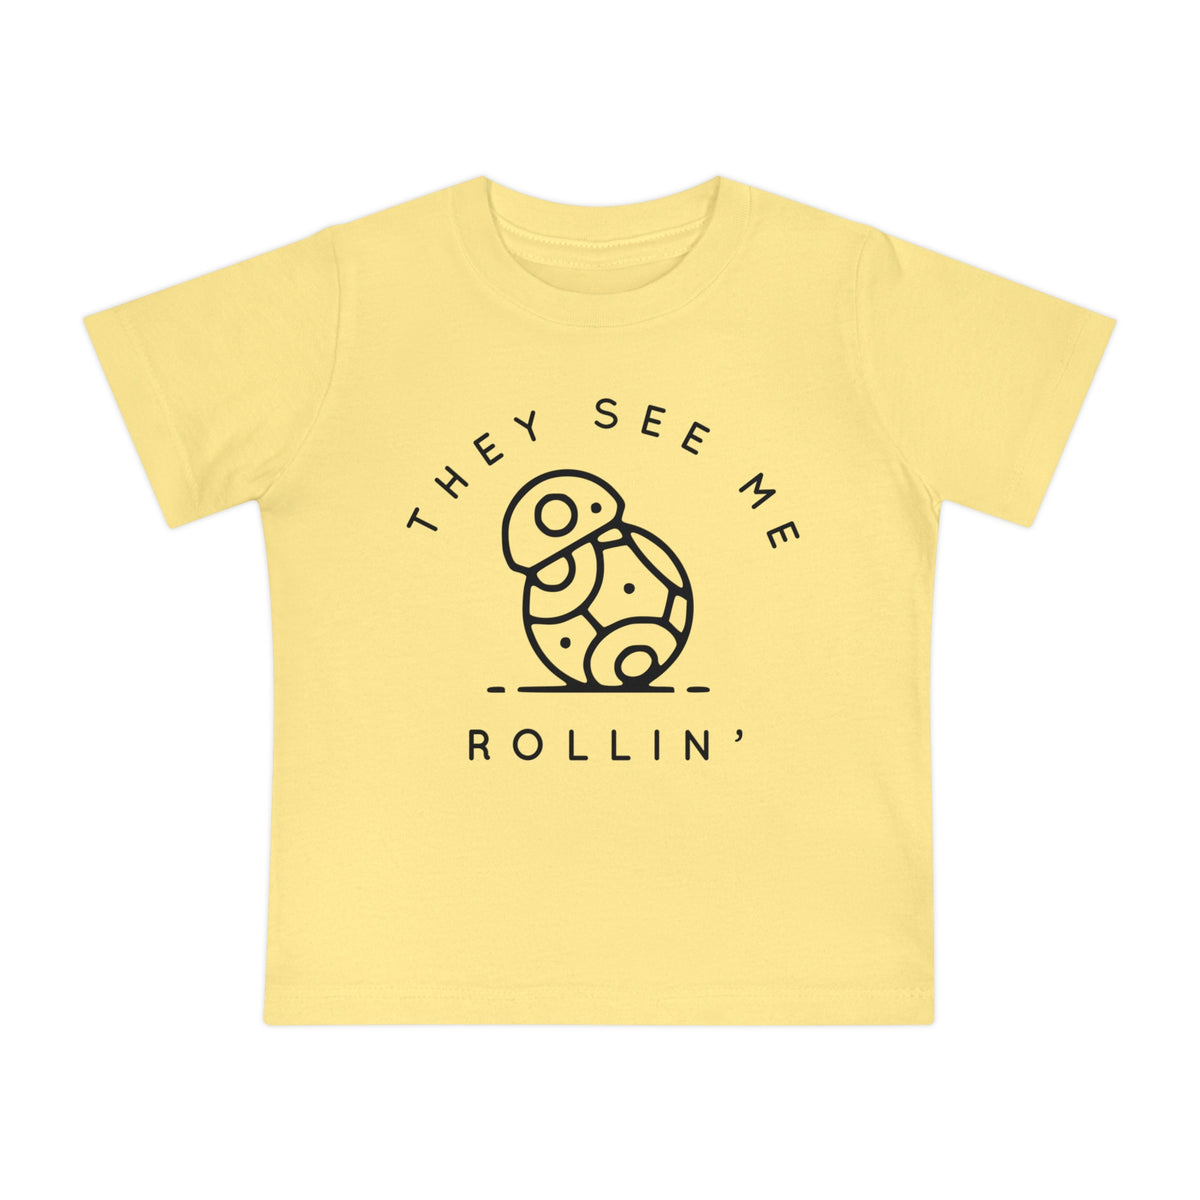 They See Me Rollin' Bella Canvas Baby Short Sleeve T-Shirt